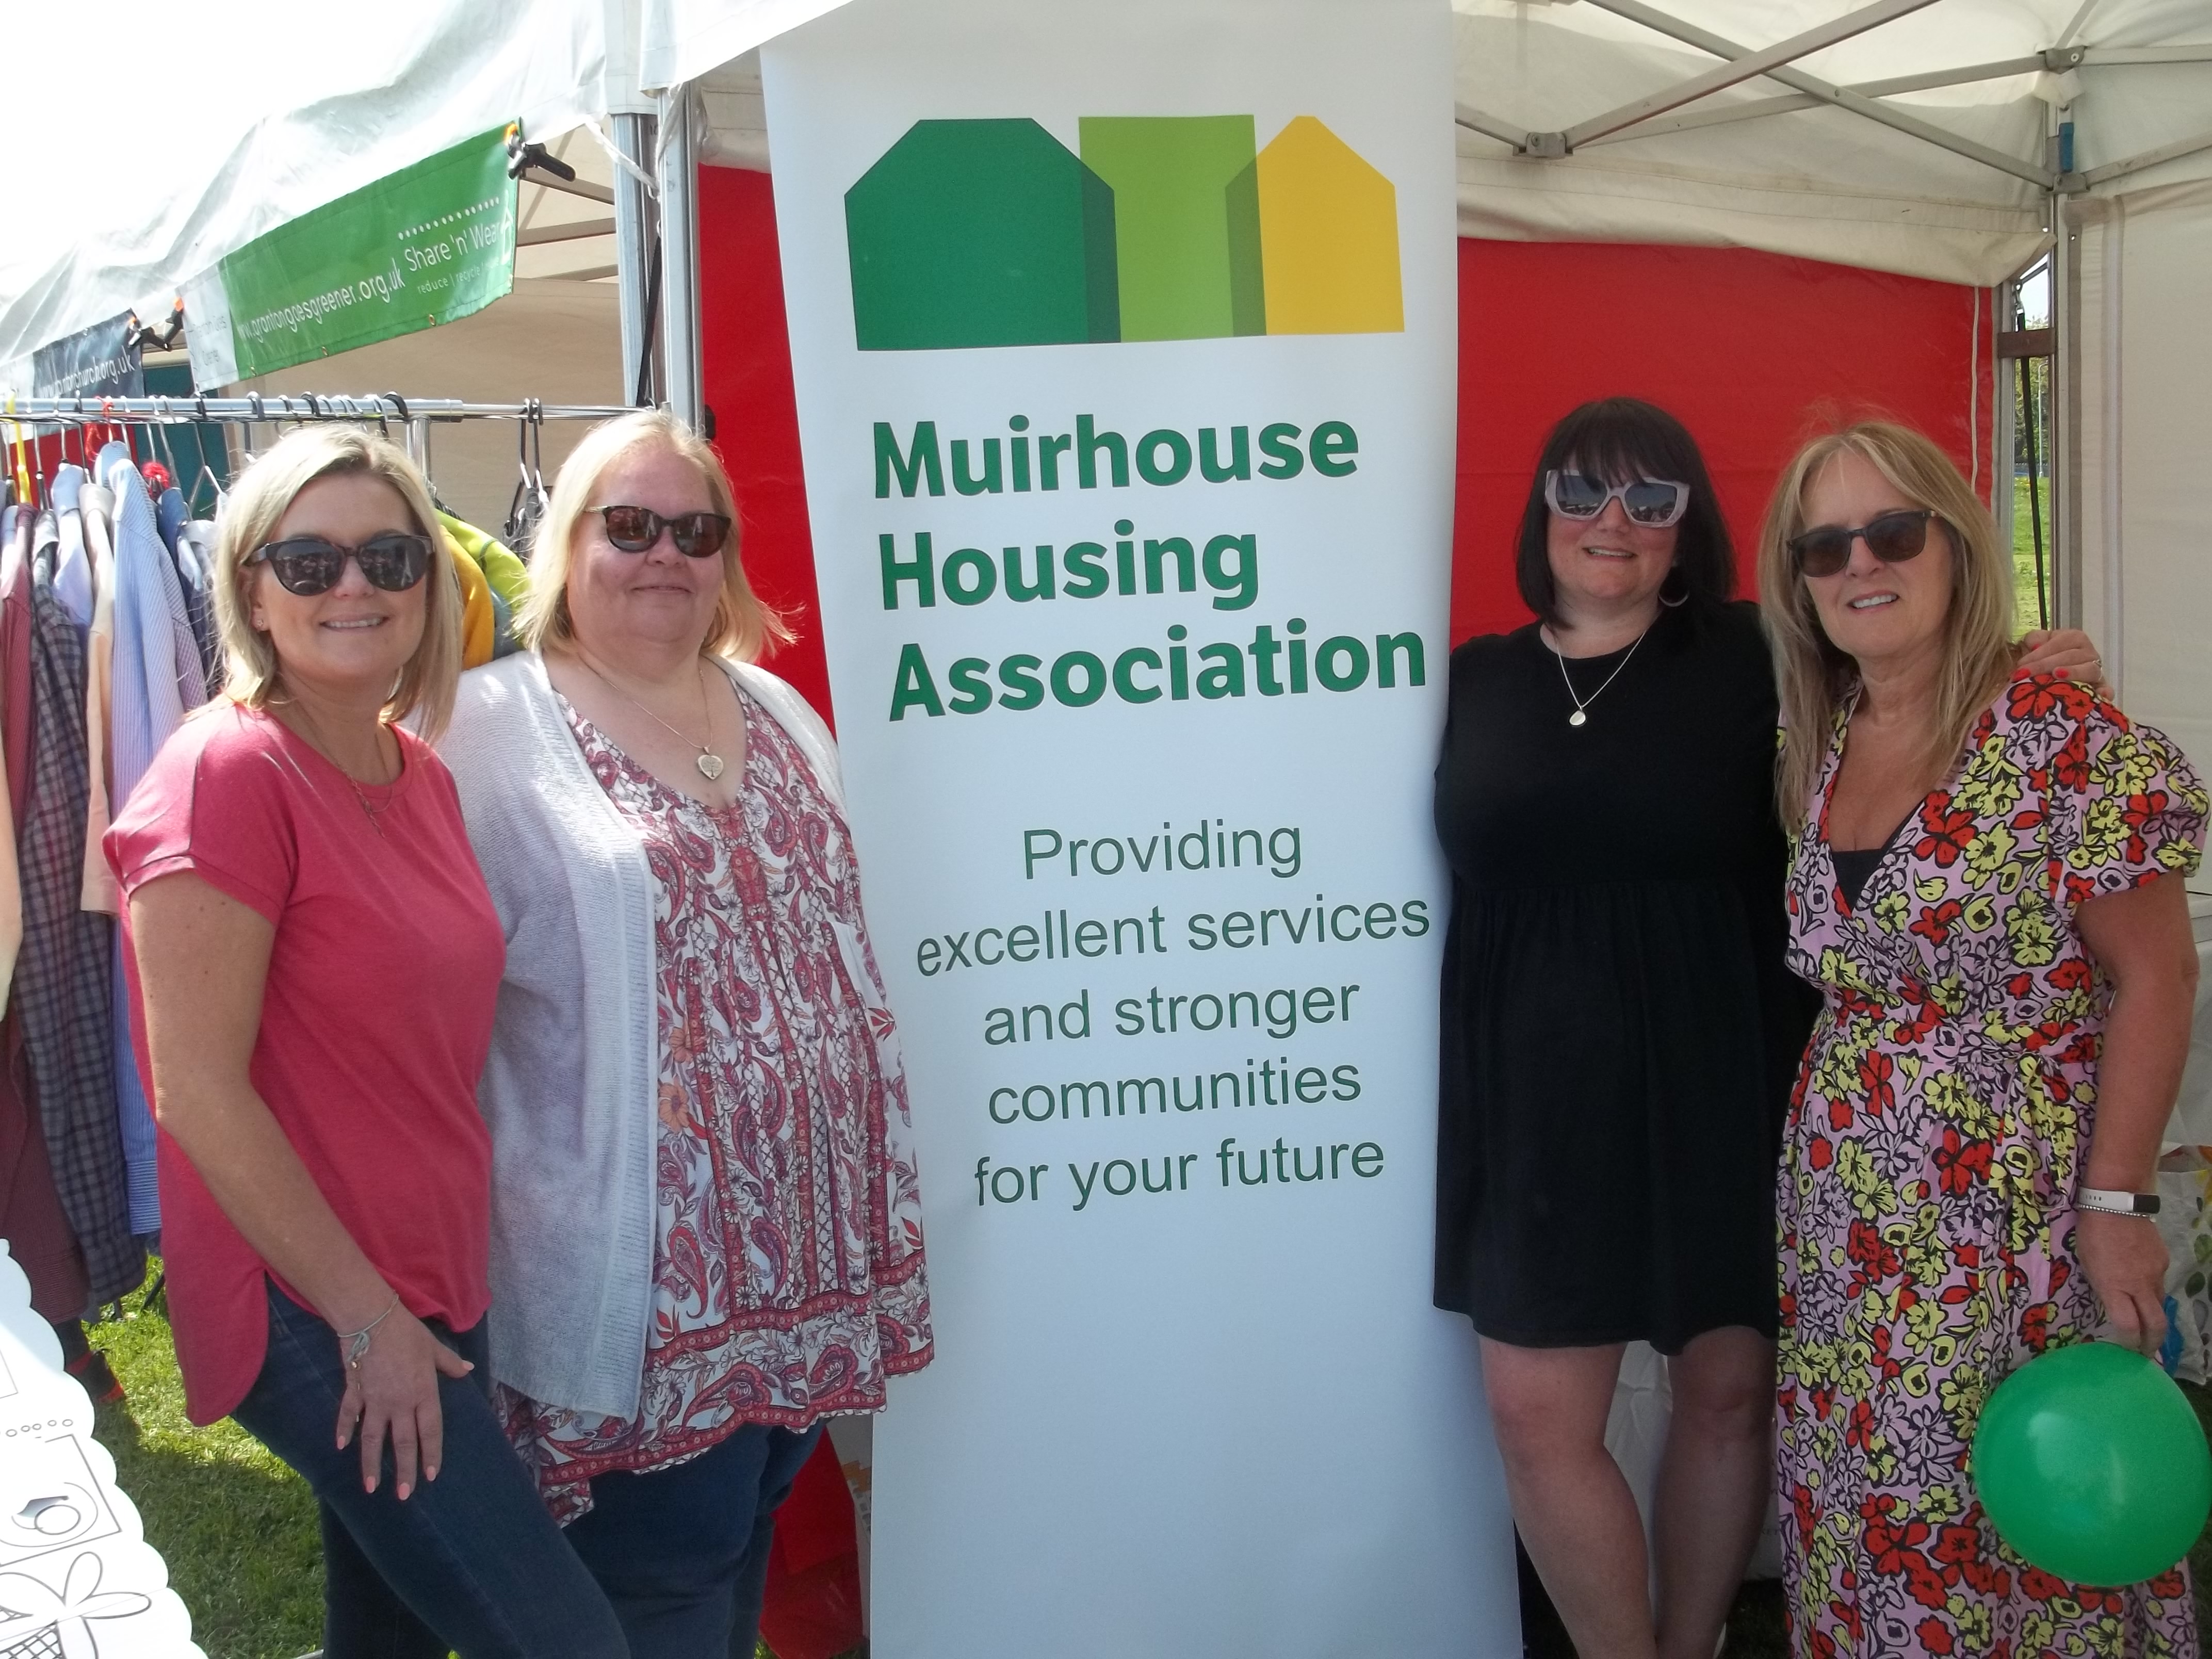 Muirhouse Housing Association delivers fun in the sun at community festival